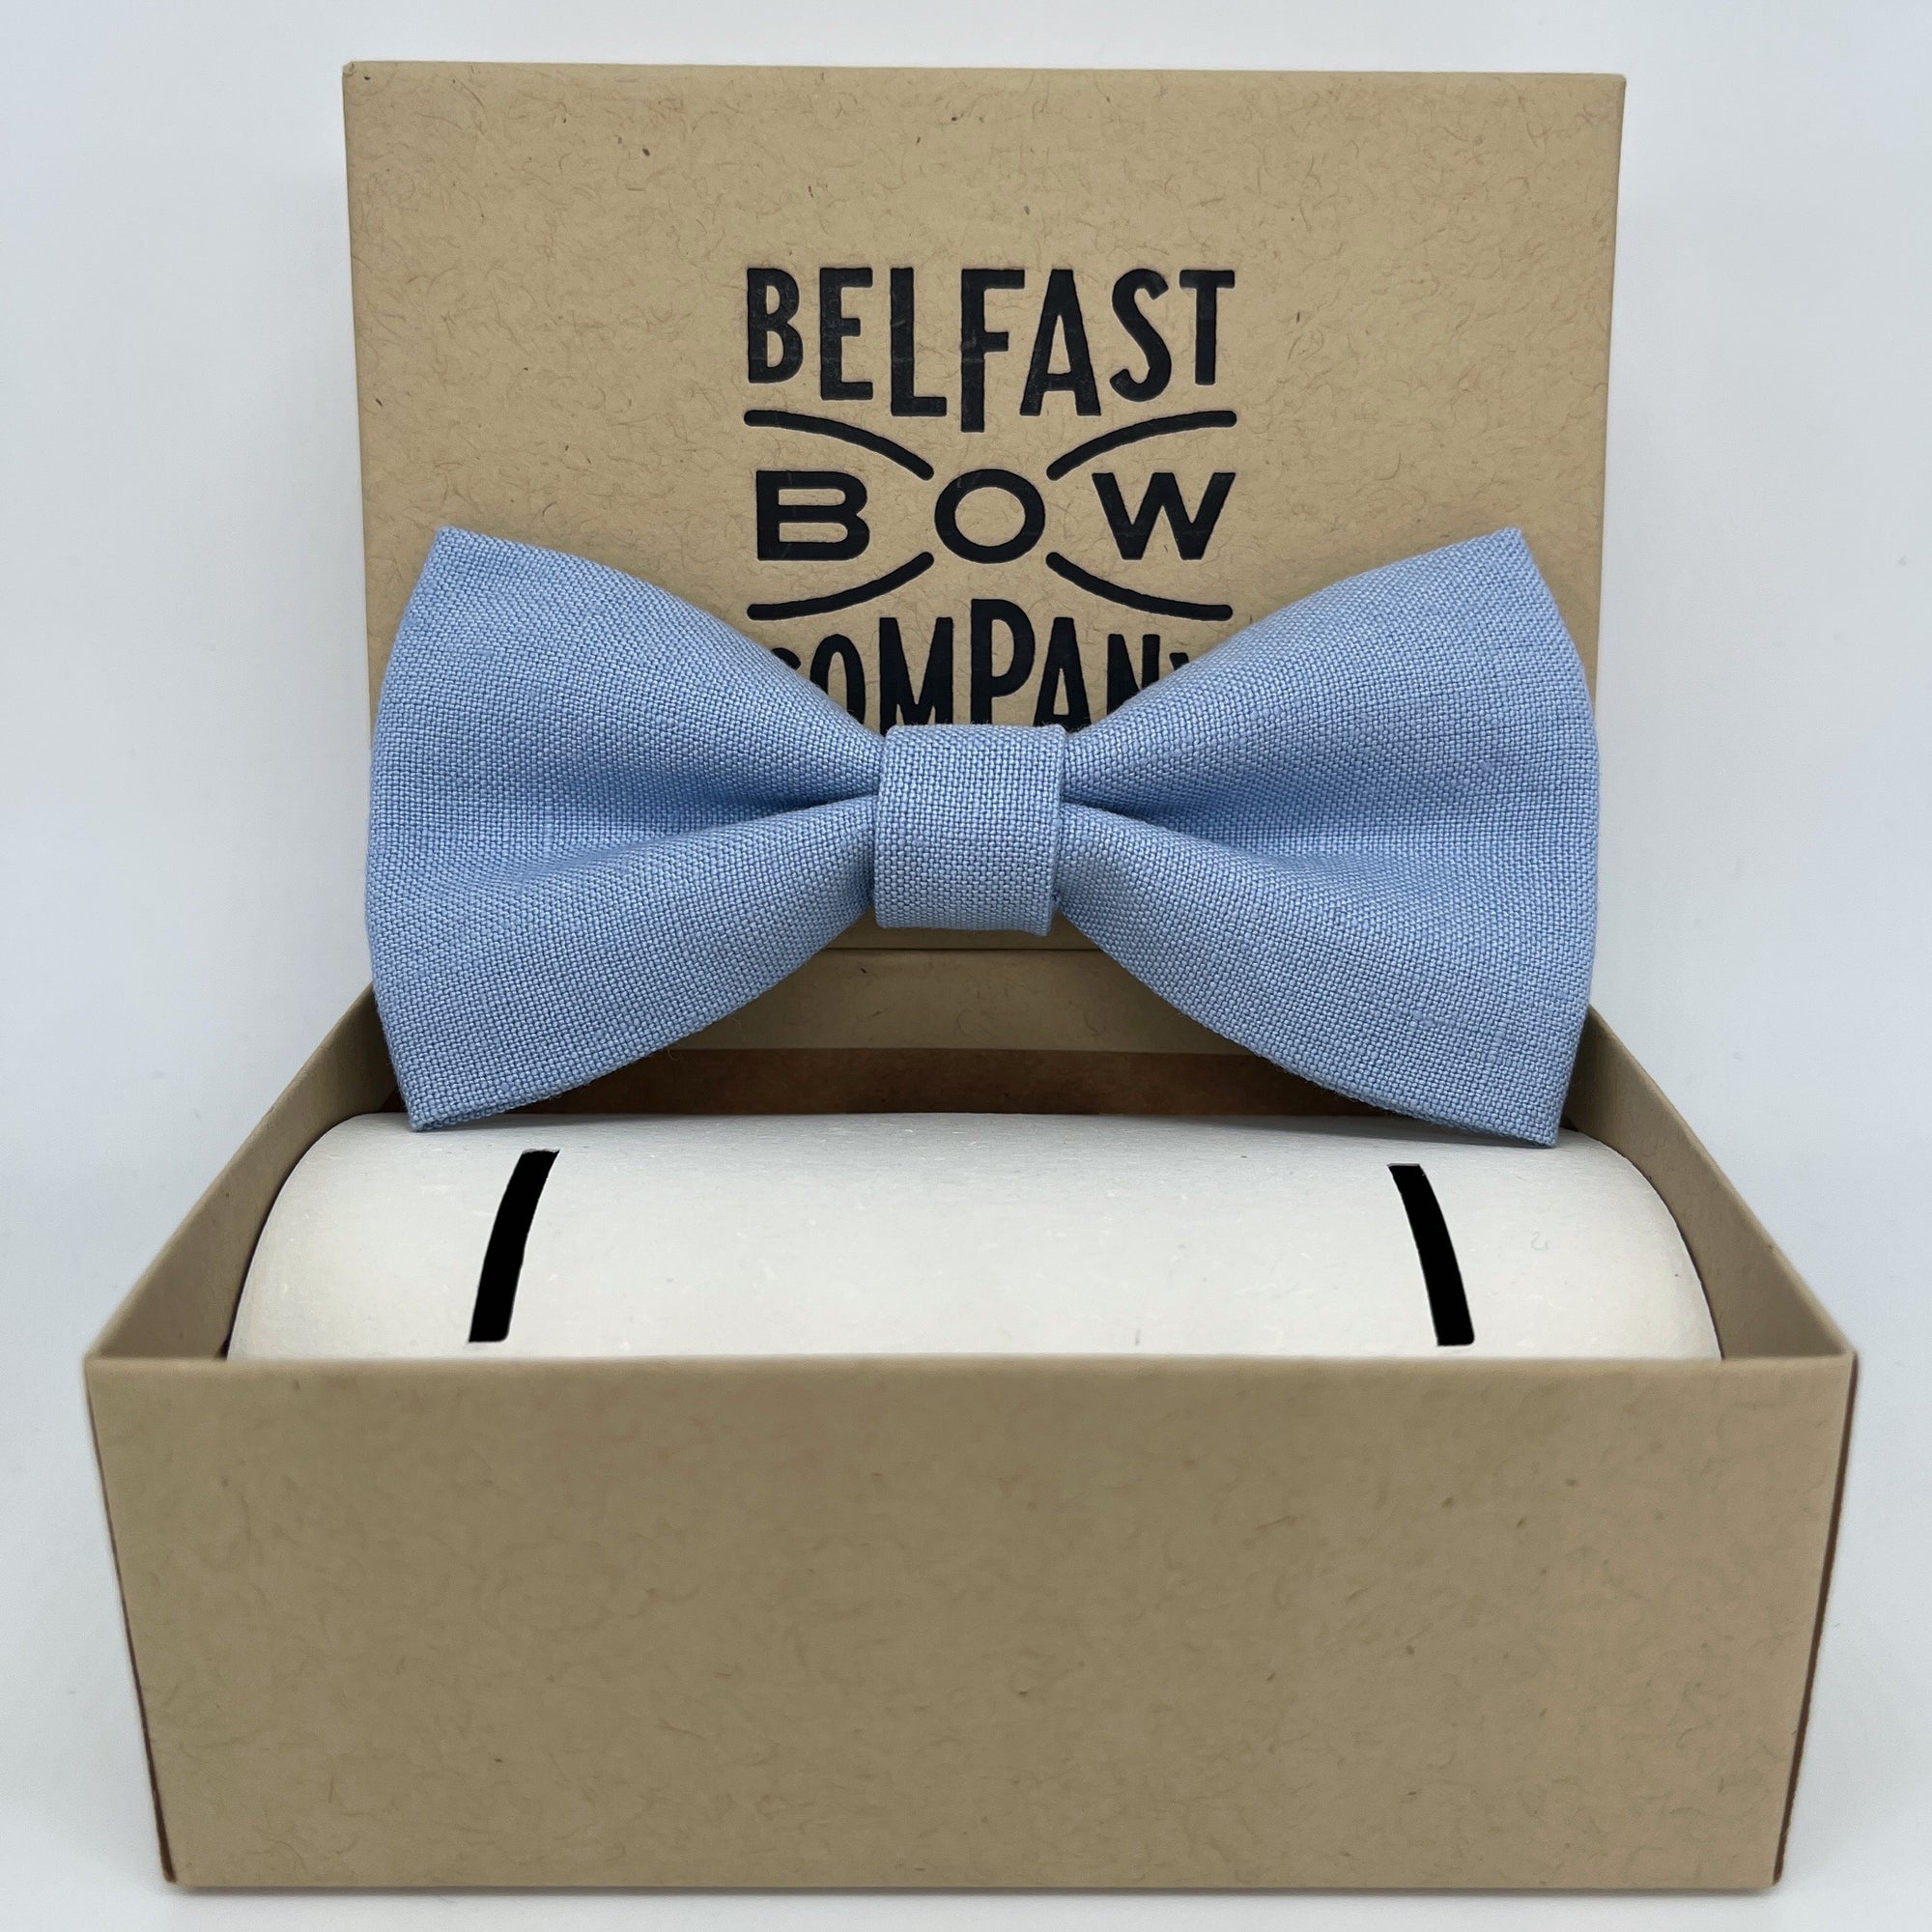 Irish Linen Dicky Bow Tie in Light Blue by the Belfast Bow Company